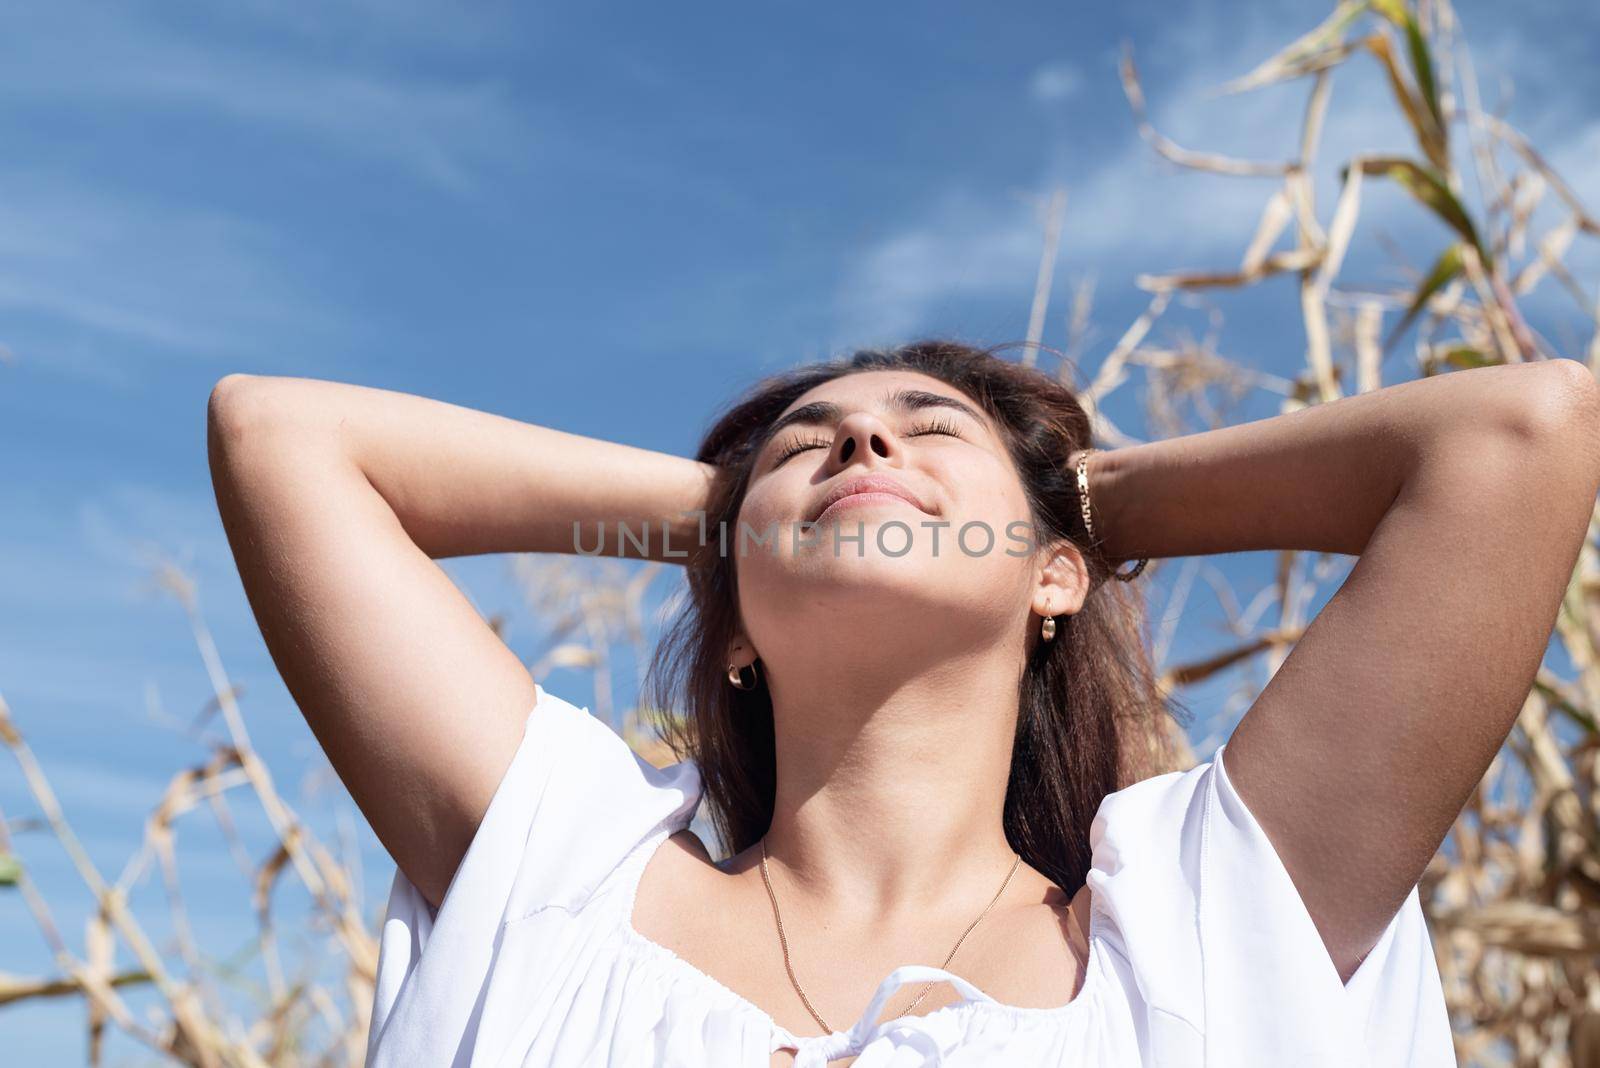 agriculture and cultivation concept. Countryside. Cheerful caucasian woman in white dress in the corn crop, sky background